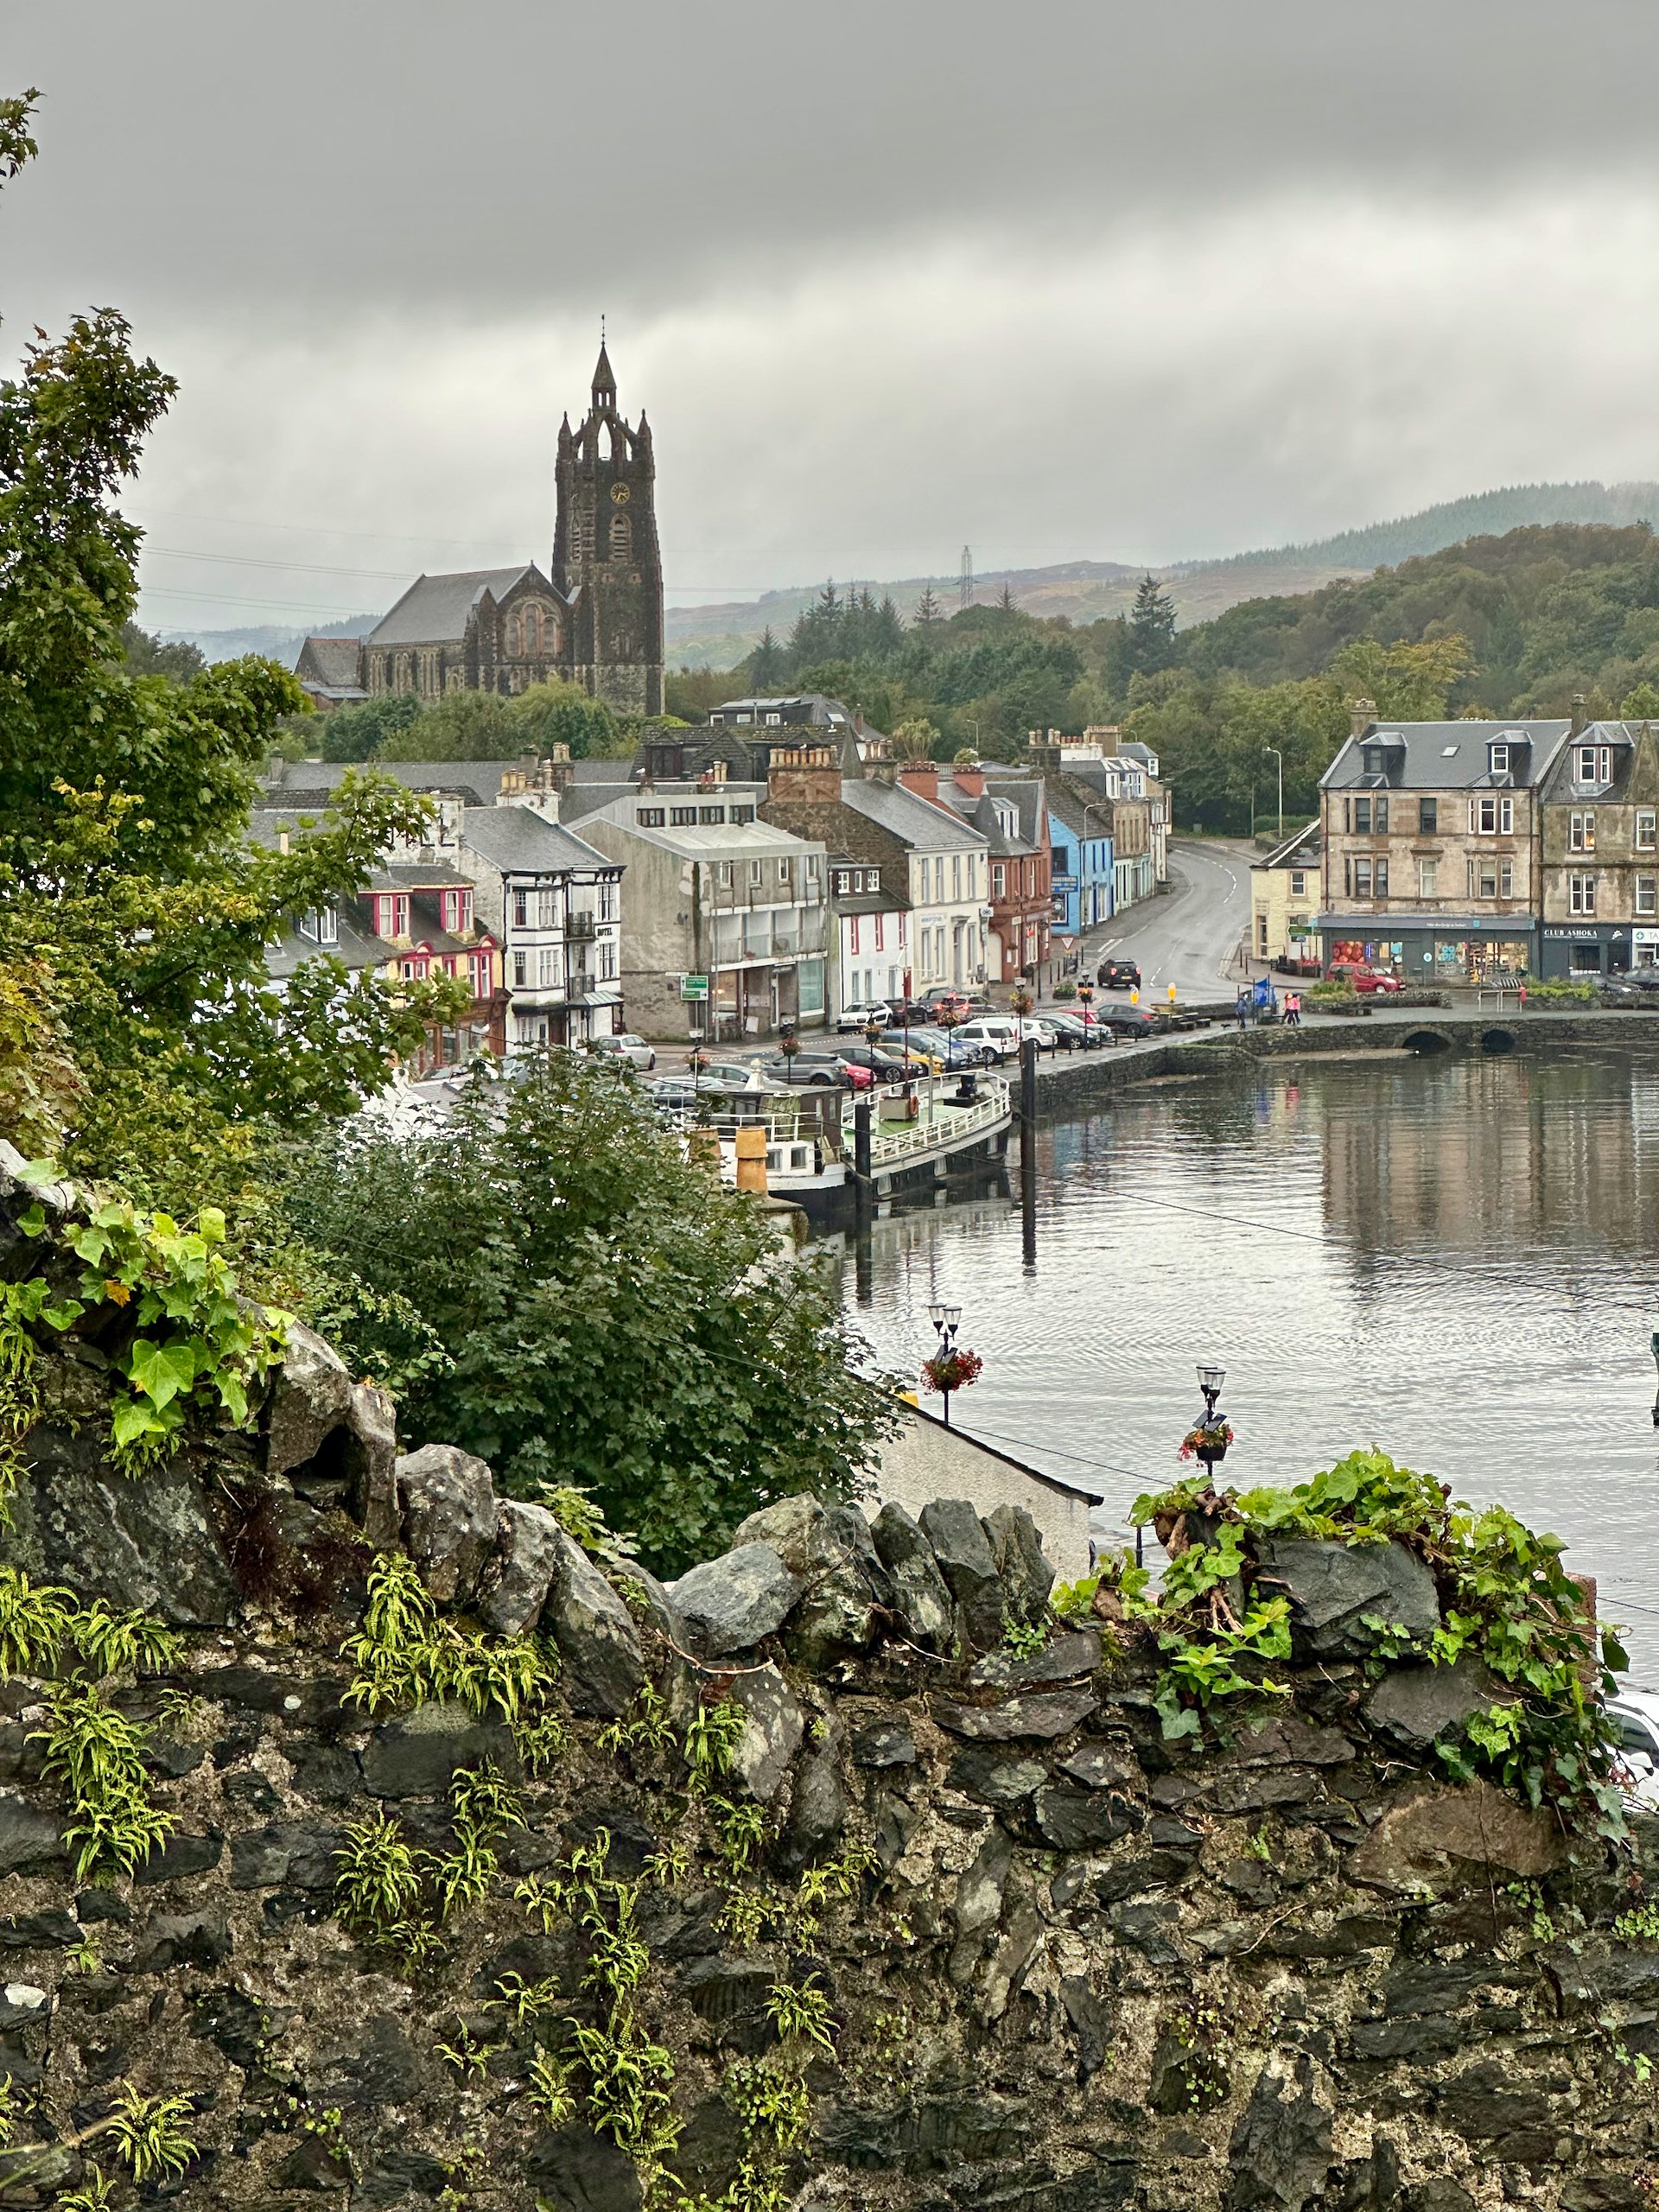  The tiny little fishing village looks out over the harbor and under the watchful eye of the ruins Tarbert Castle.  